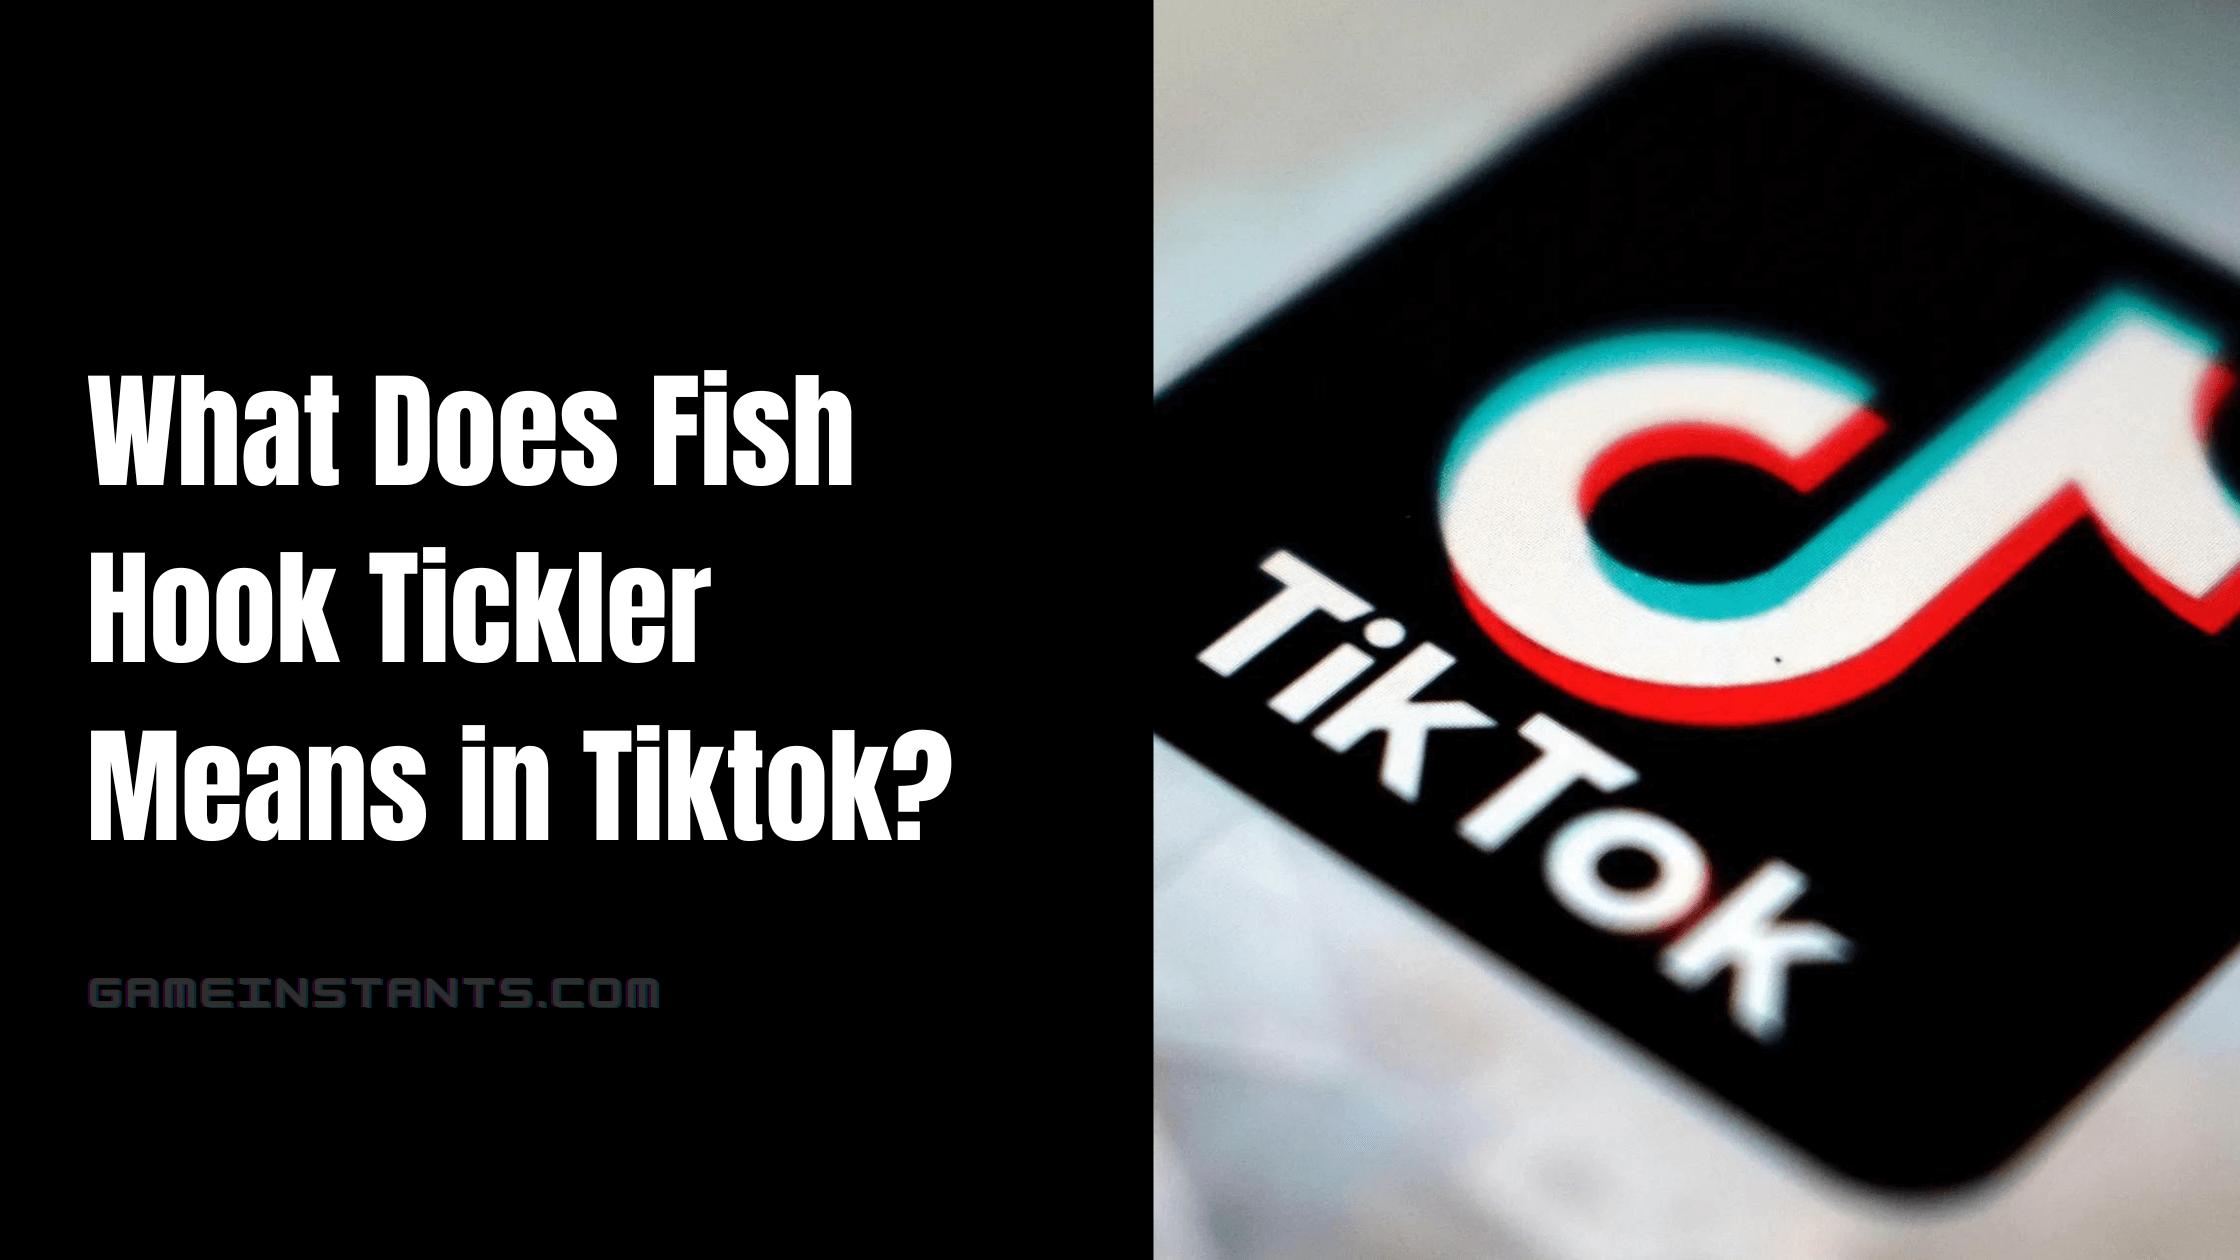 What Does Fish Hook Tickler Means in Tiktok